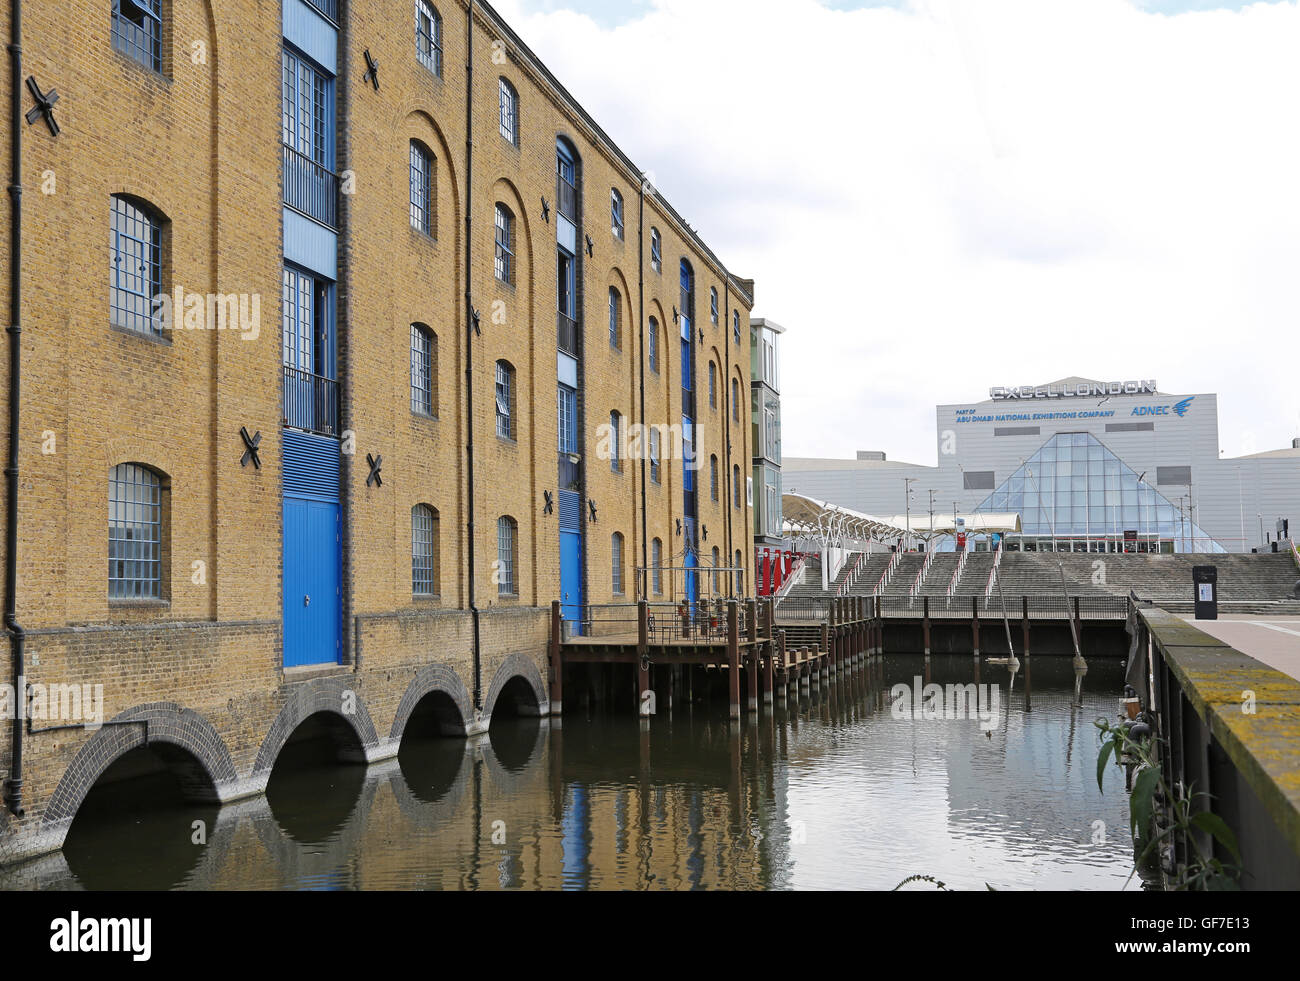 Converted Victorian warehouses at London's Royal Victoria Dock, next to the new Excel Exhibition Centre - seen to the right Stock Photo